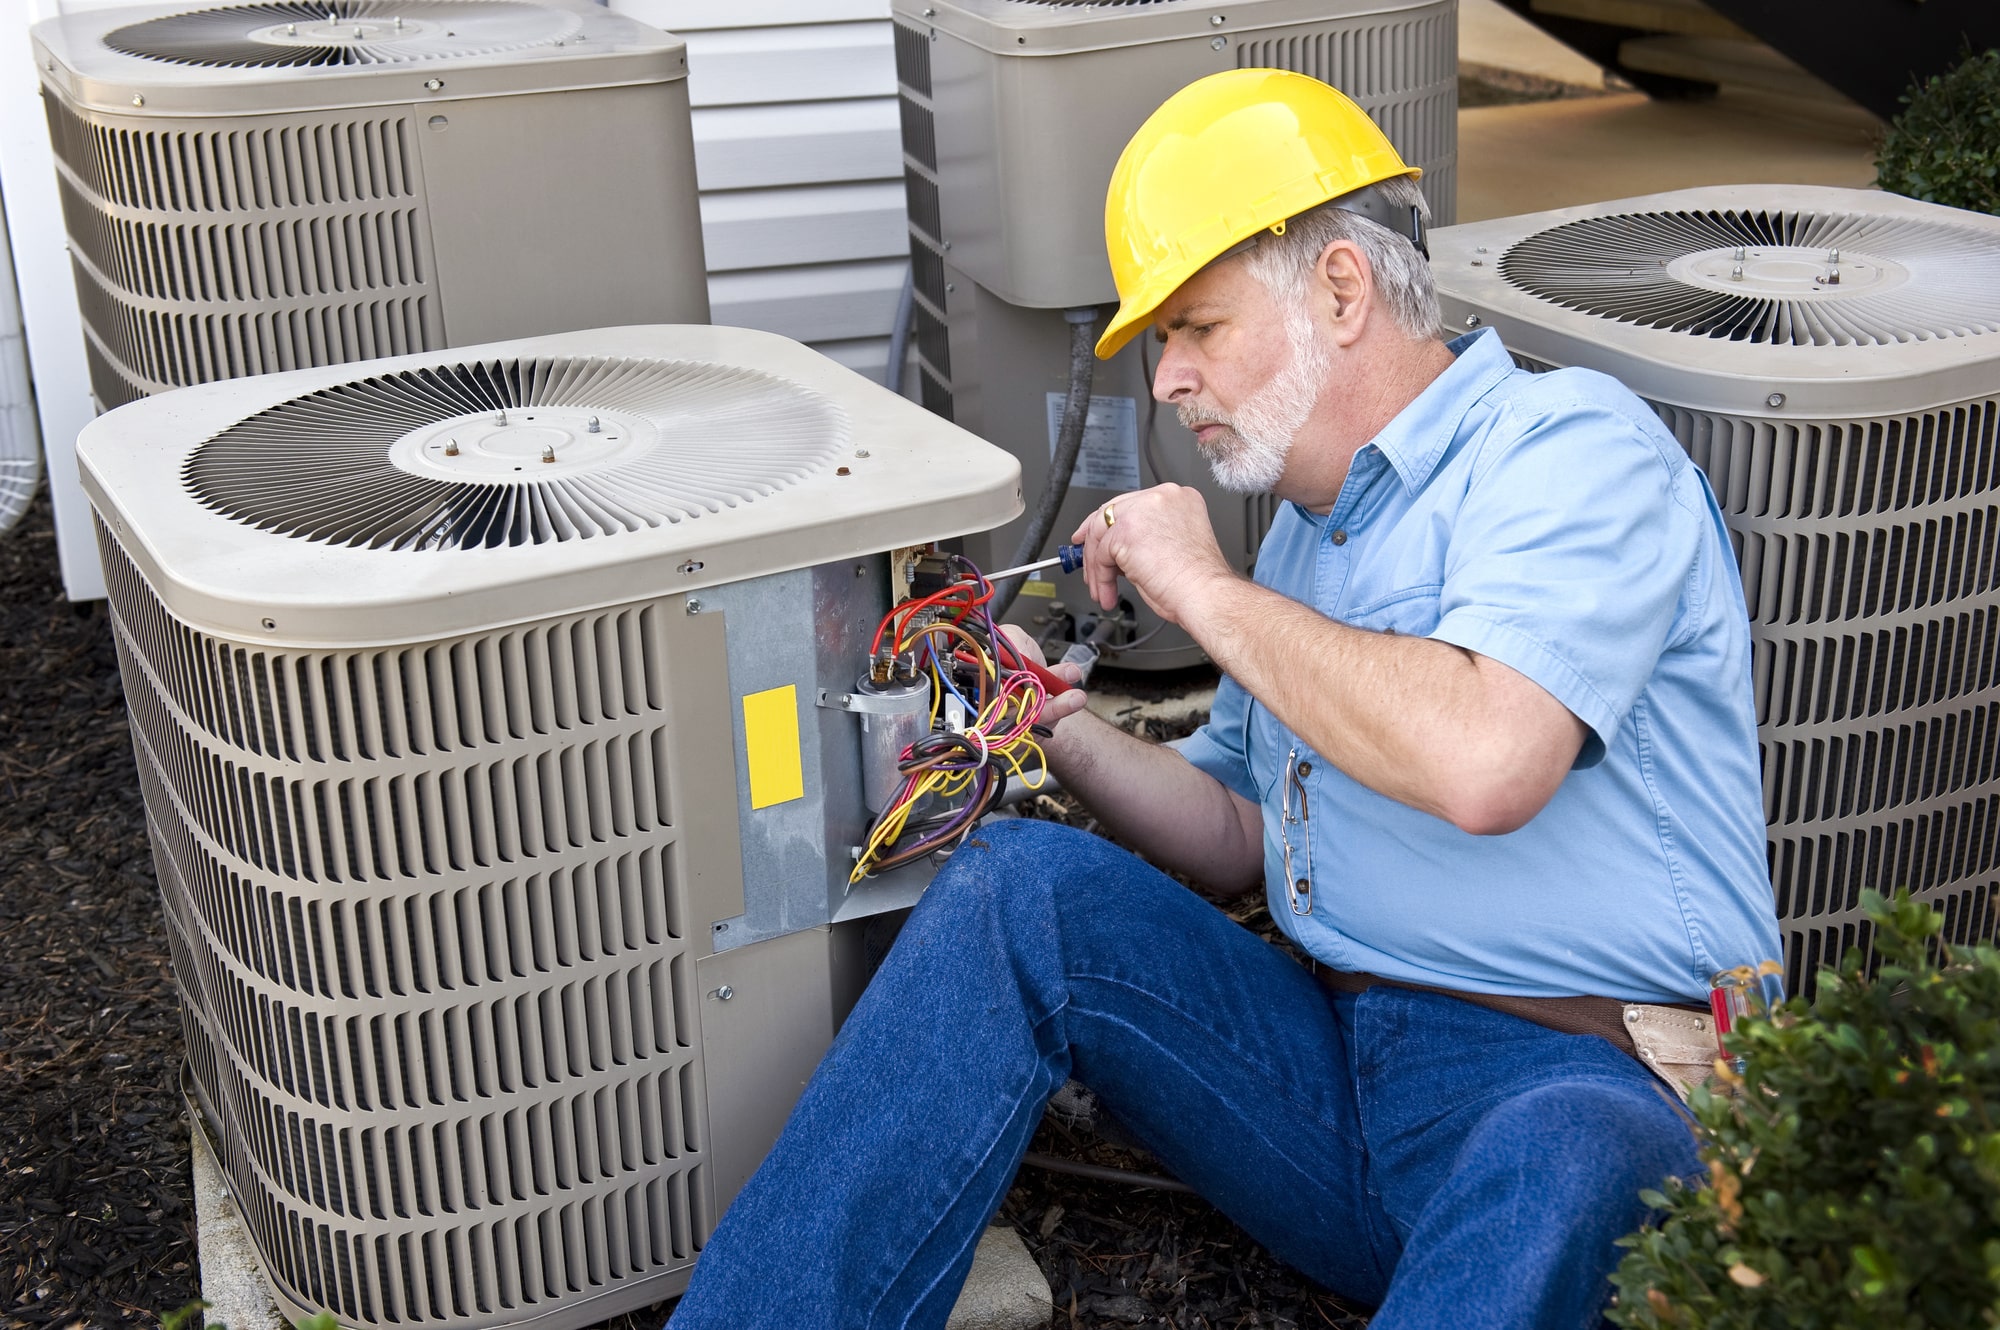 Should I Repair Or Replace My AC Unit?